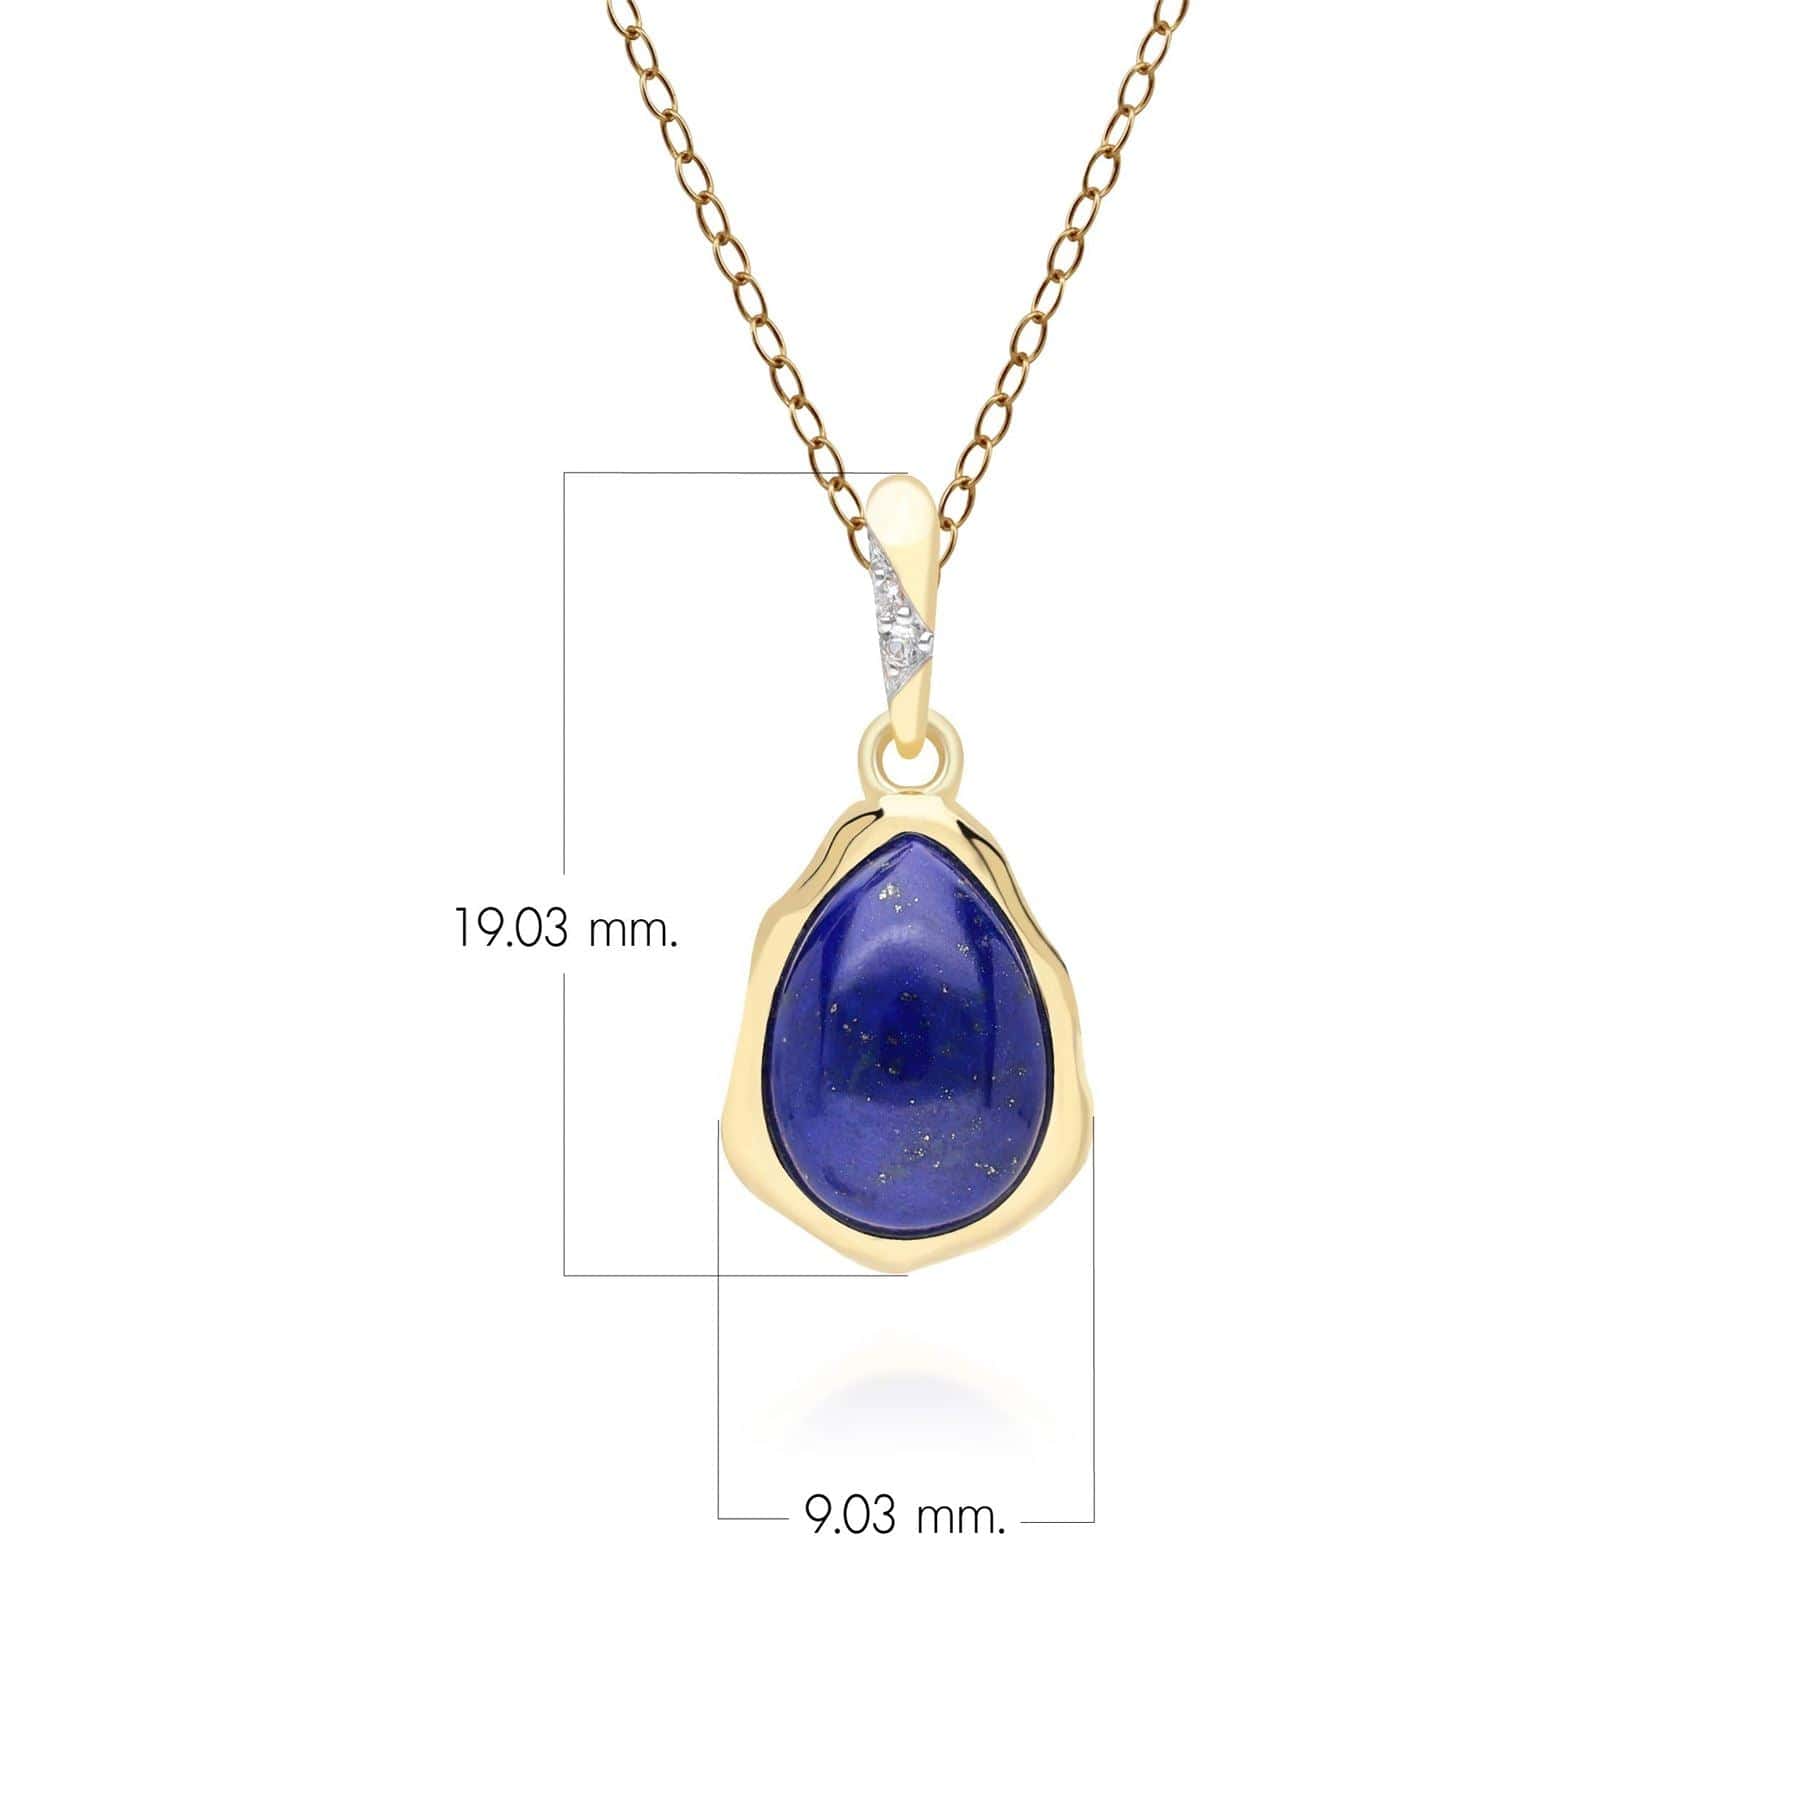 253P335302925 Irregular Lapis Lazuli & Topaz Pendant In 18ct Gold Plated SterlIng Silver Dimensions